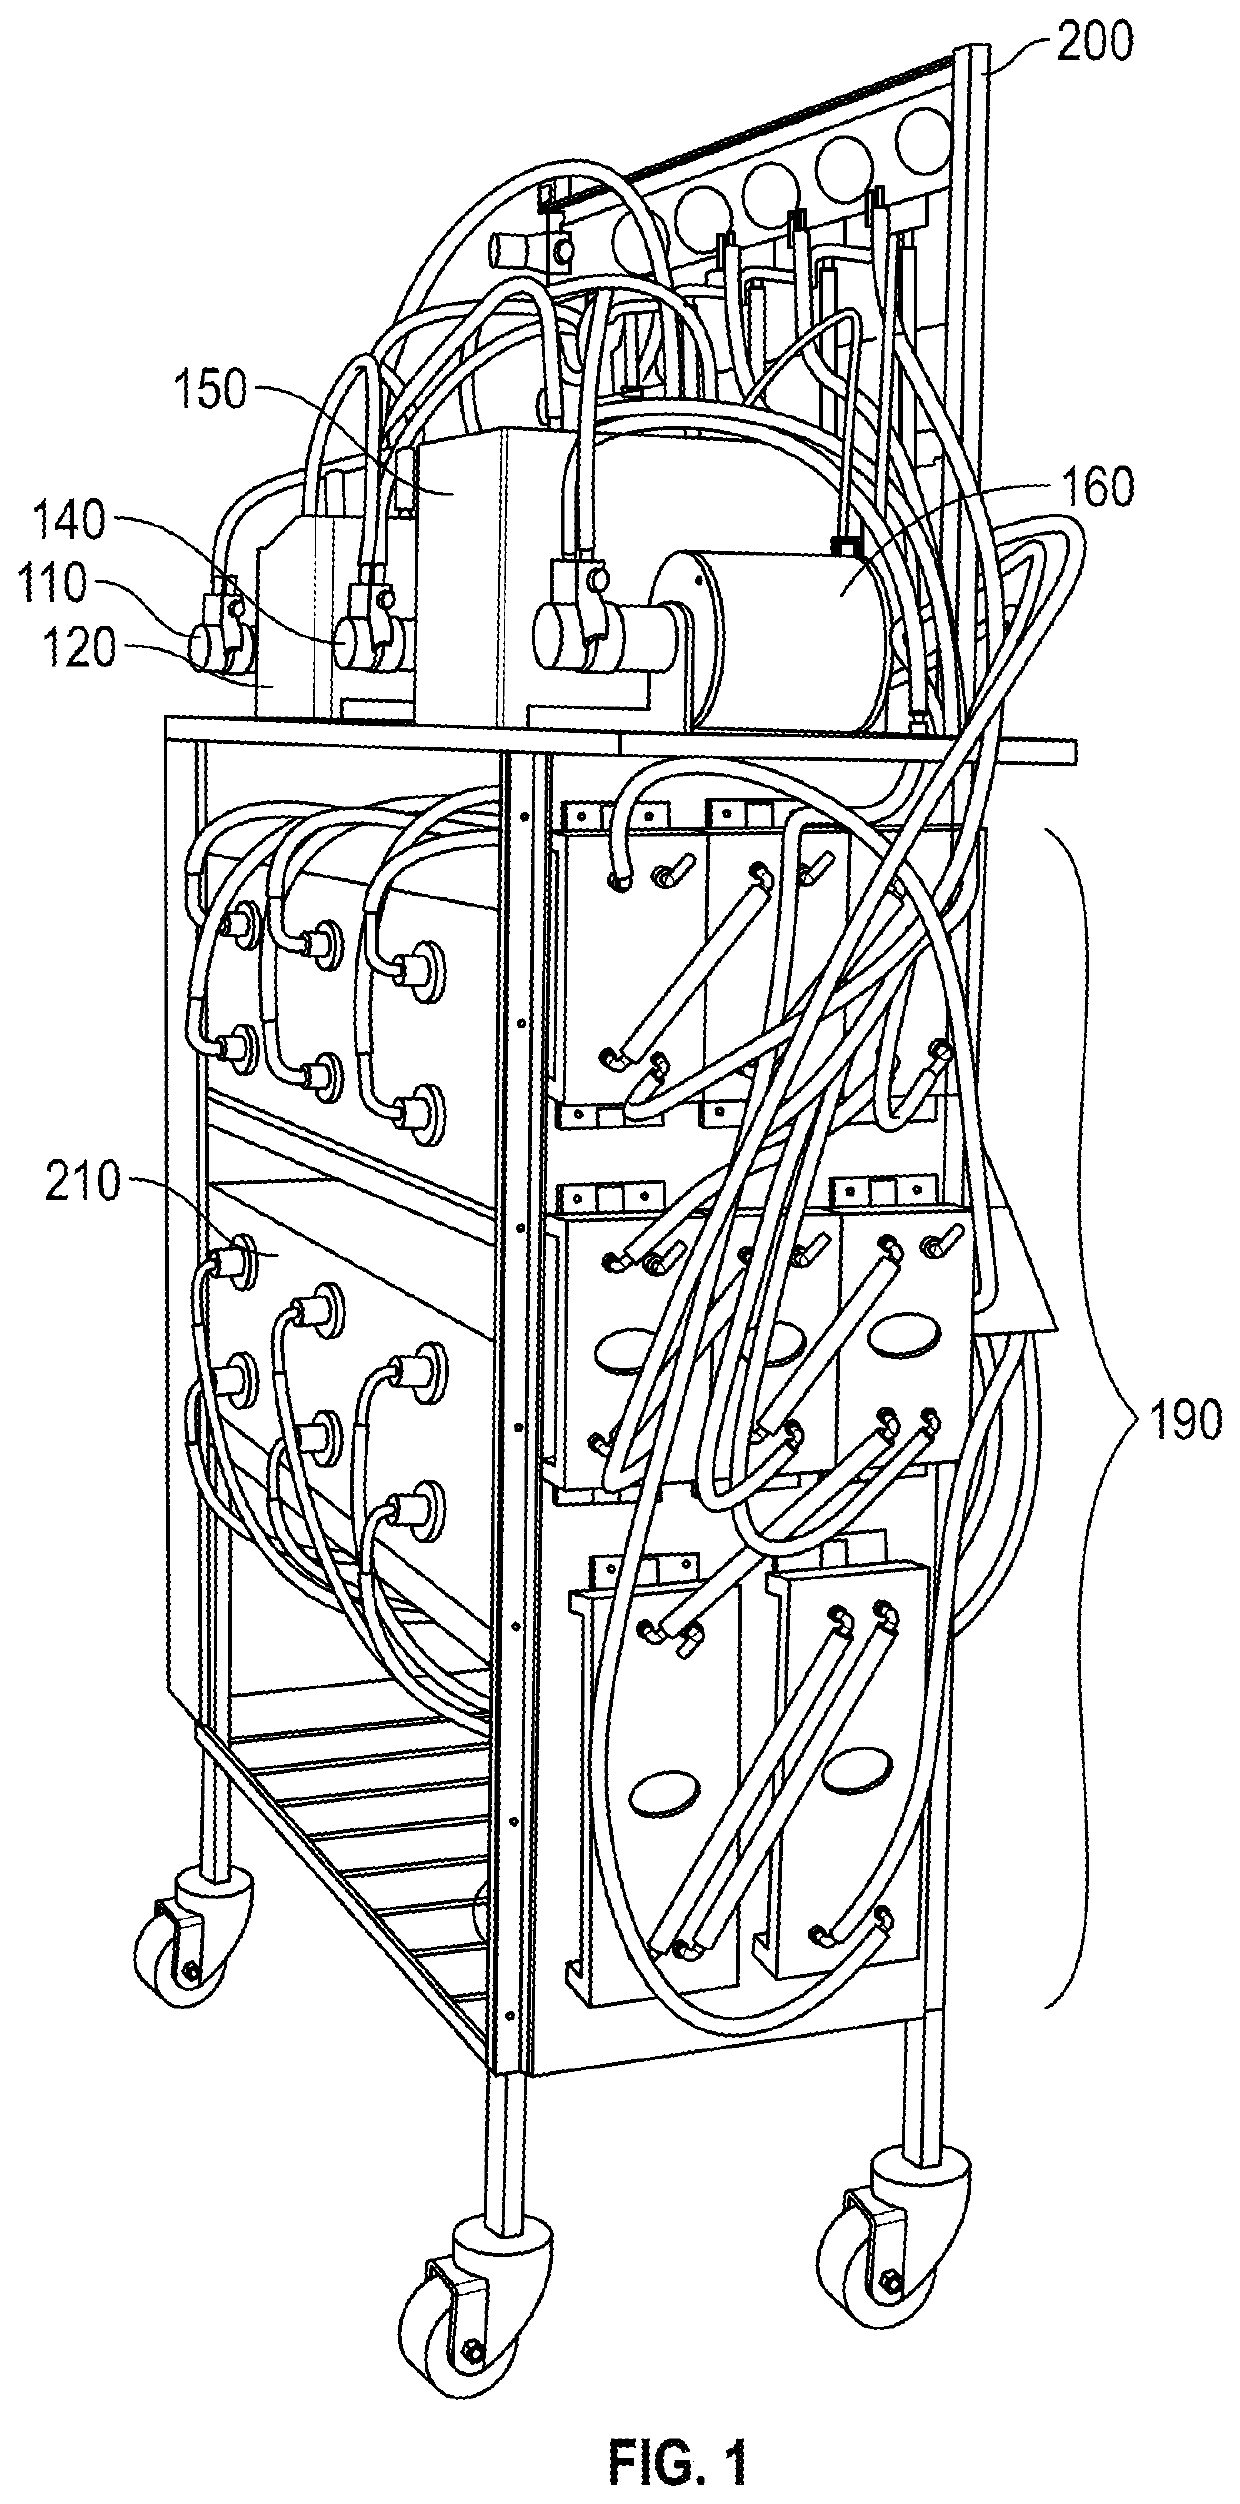 Soda Carbonation and Dispensation System and Method